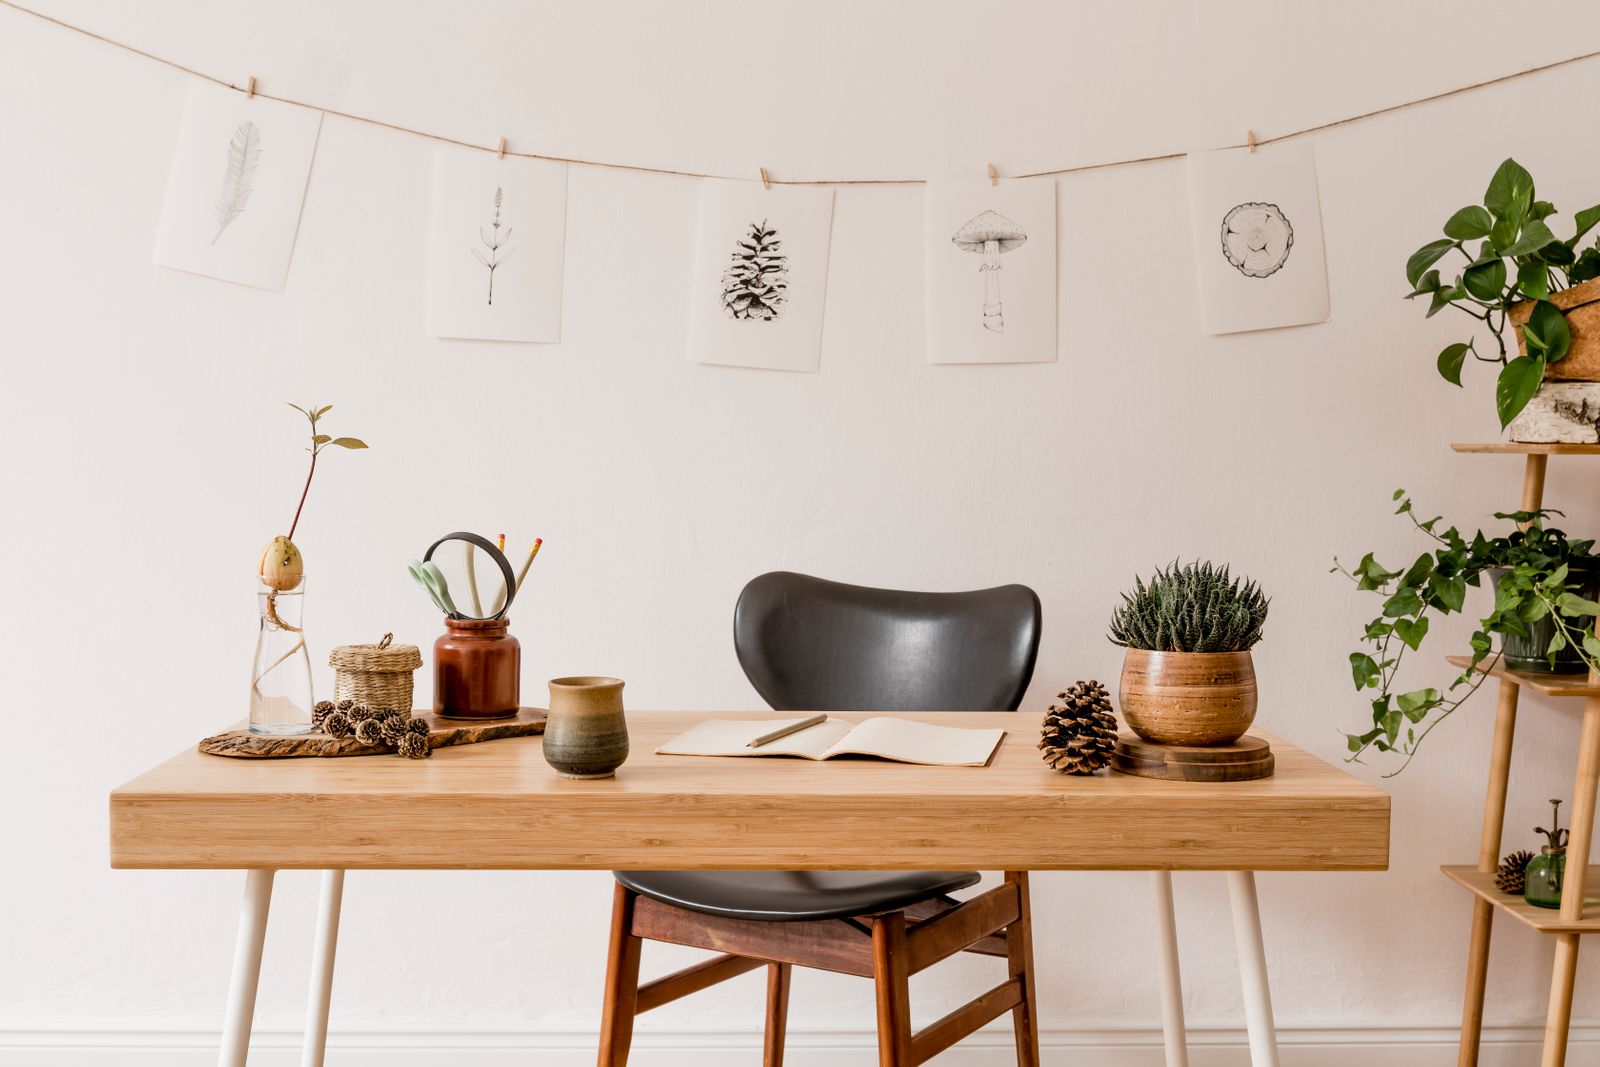 Desk with plants and nature drawings